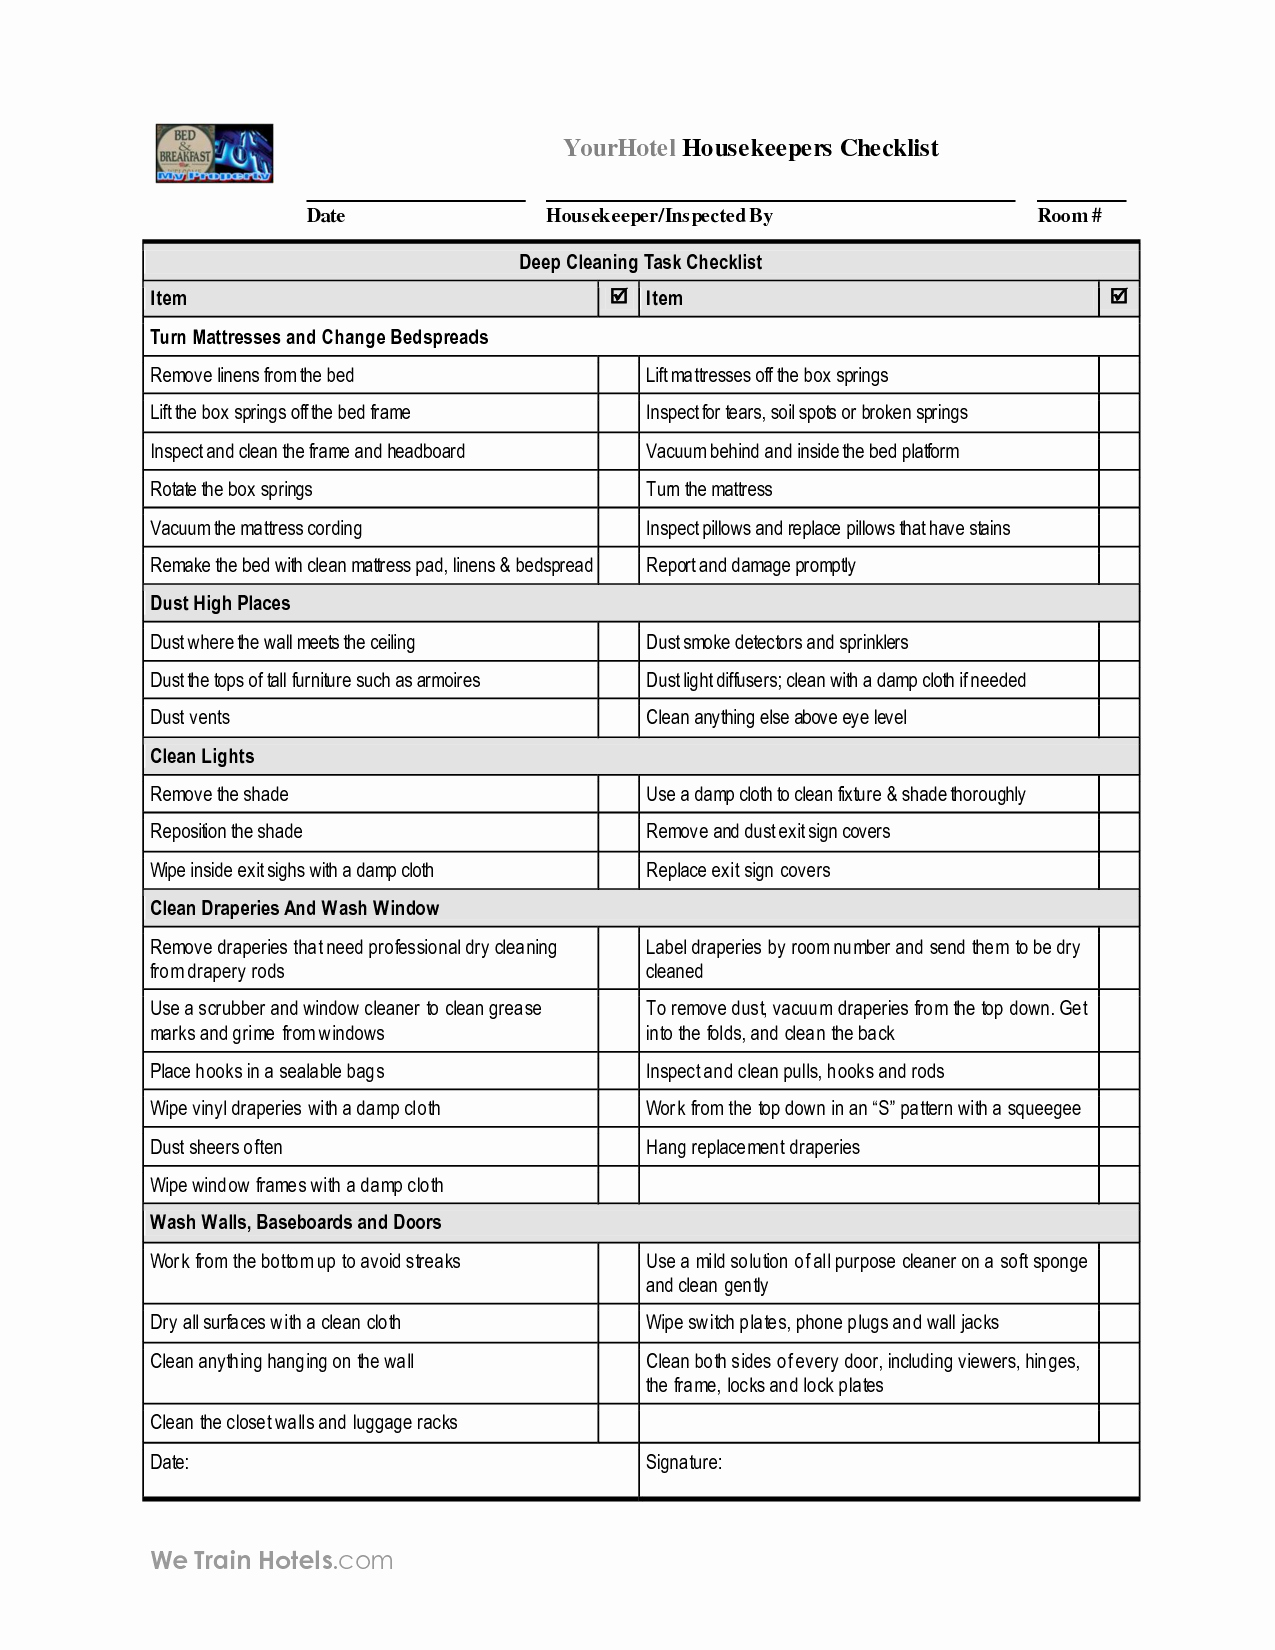 Deep Cleaning Checklist Template Inspirational 9 Best Of Hotel Housekeeping Checklist Printable